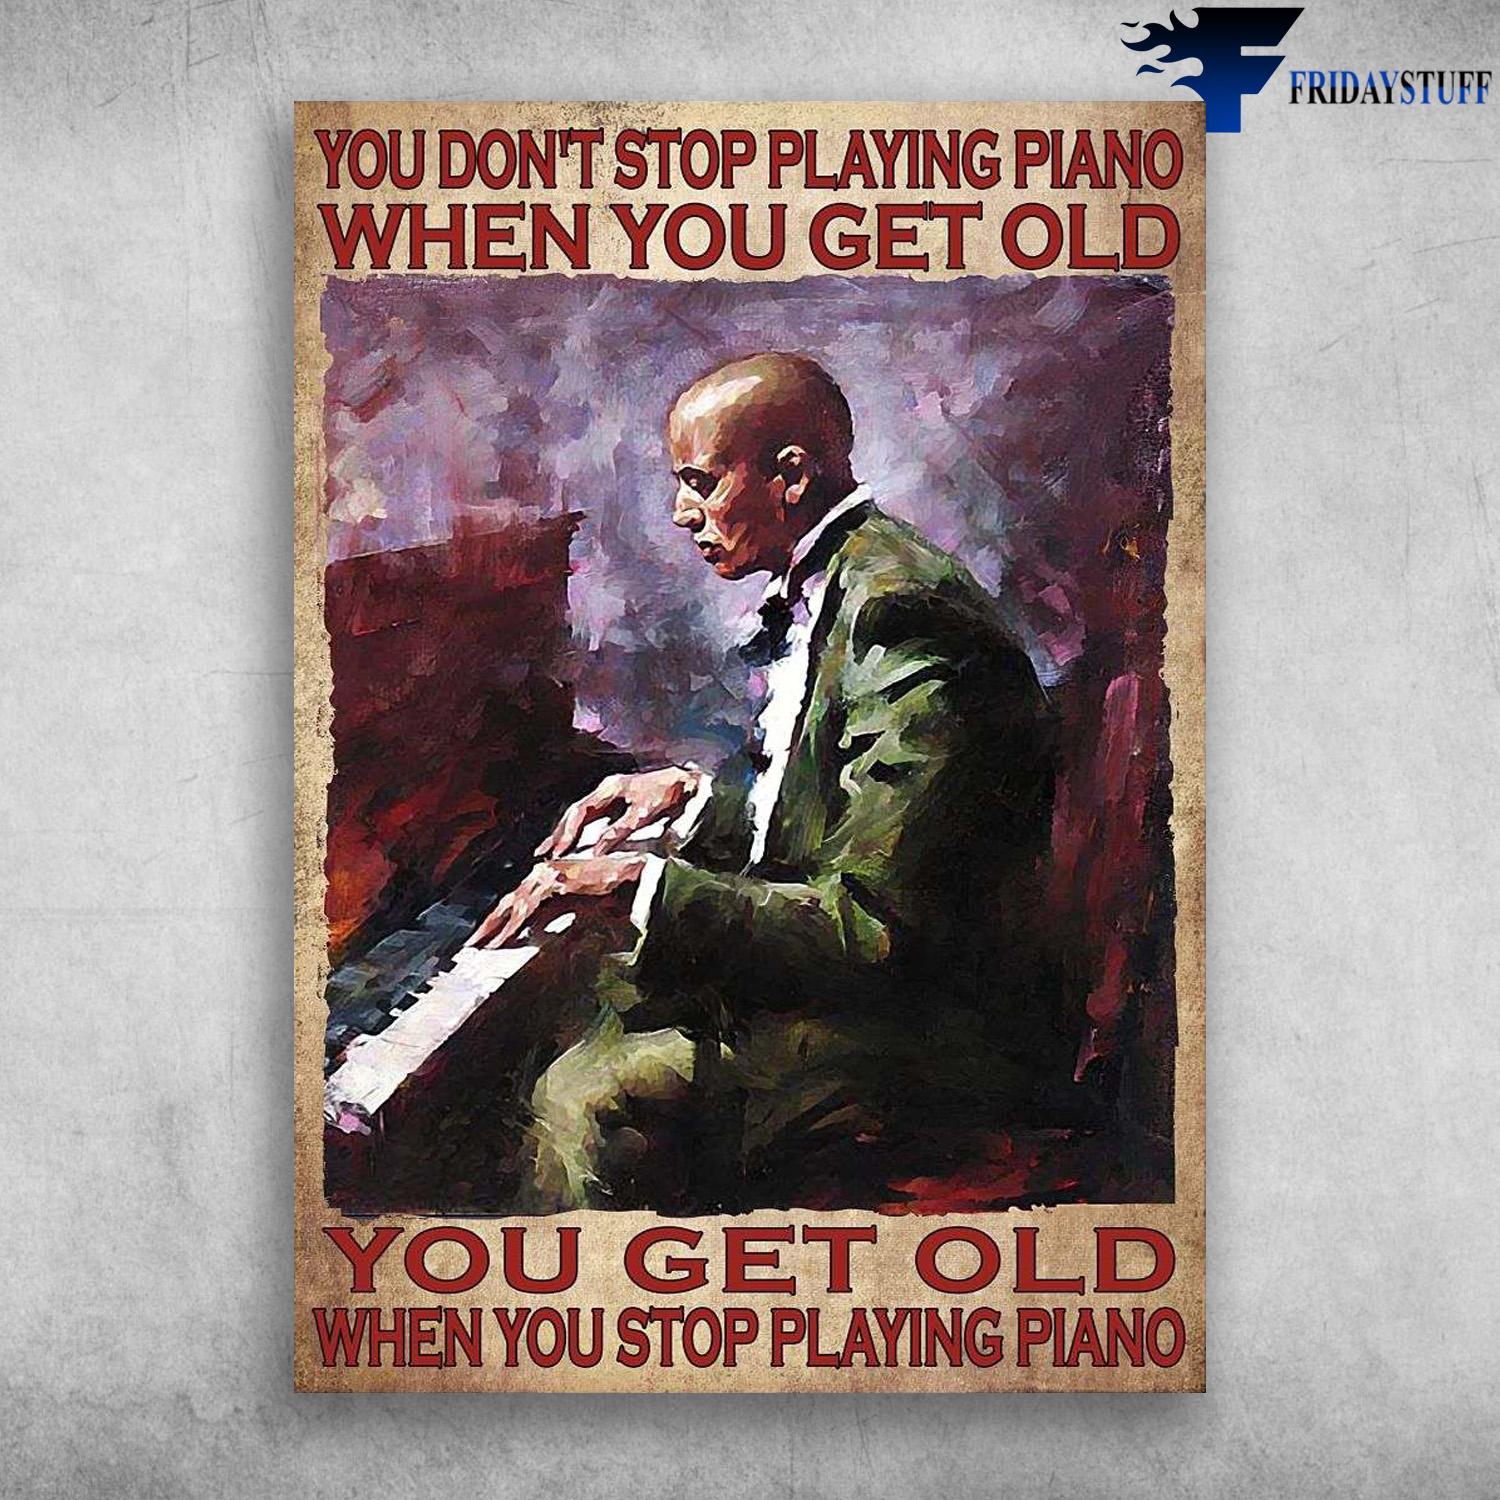 Black Man, Old Man Piano - You Don't Stop Playing Piano When You Get Old, You Get Old When You Stop Playing Piano